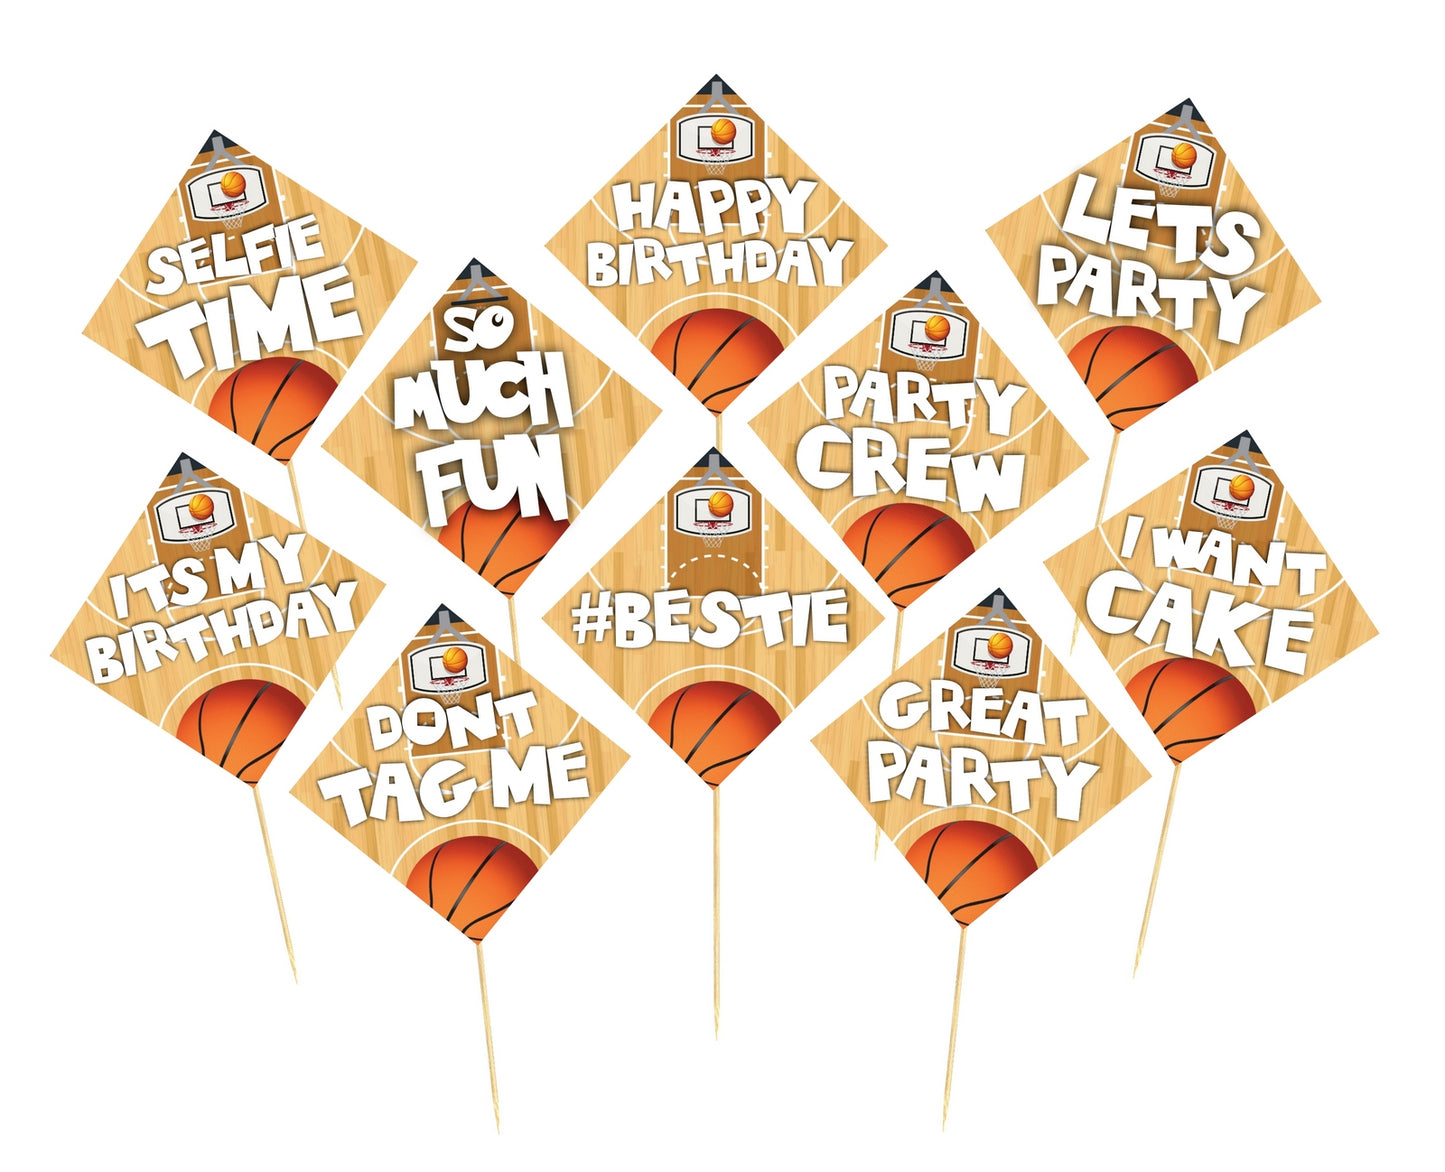 Basket Ball Birthday Photo Booth Party Props Theme Birthday Party Decoration, Birthday Photo Booth Party Item for Adults and Kids